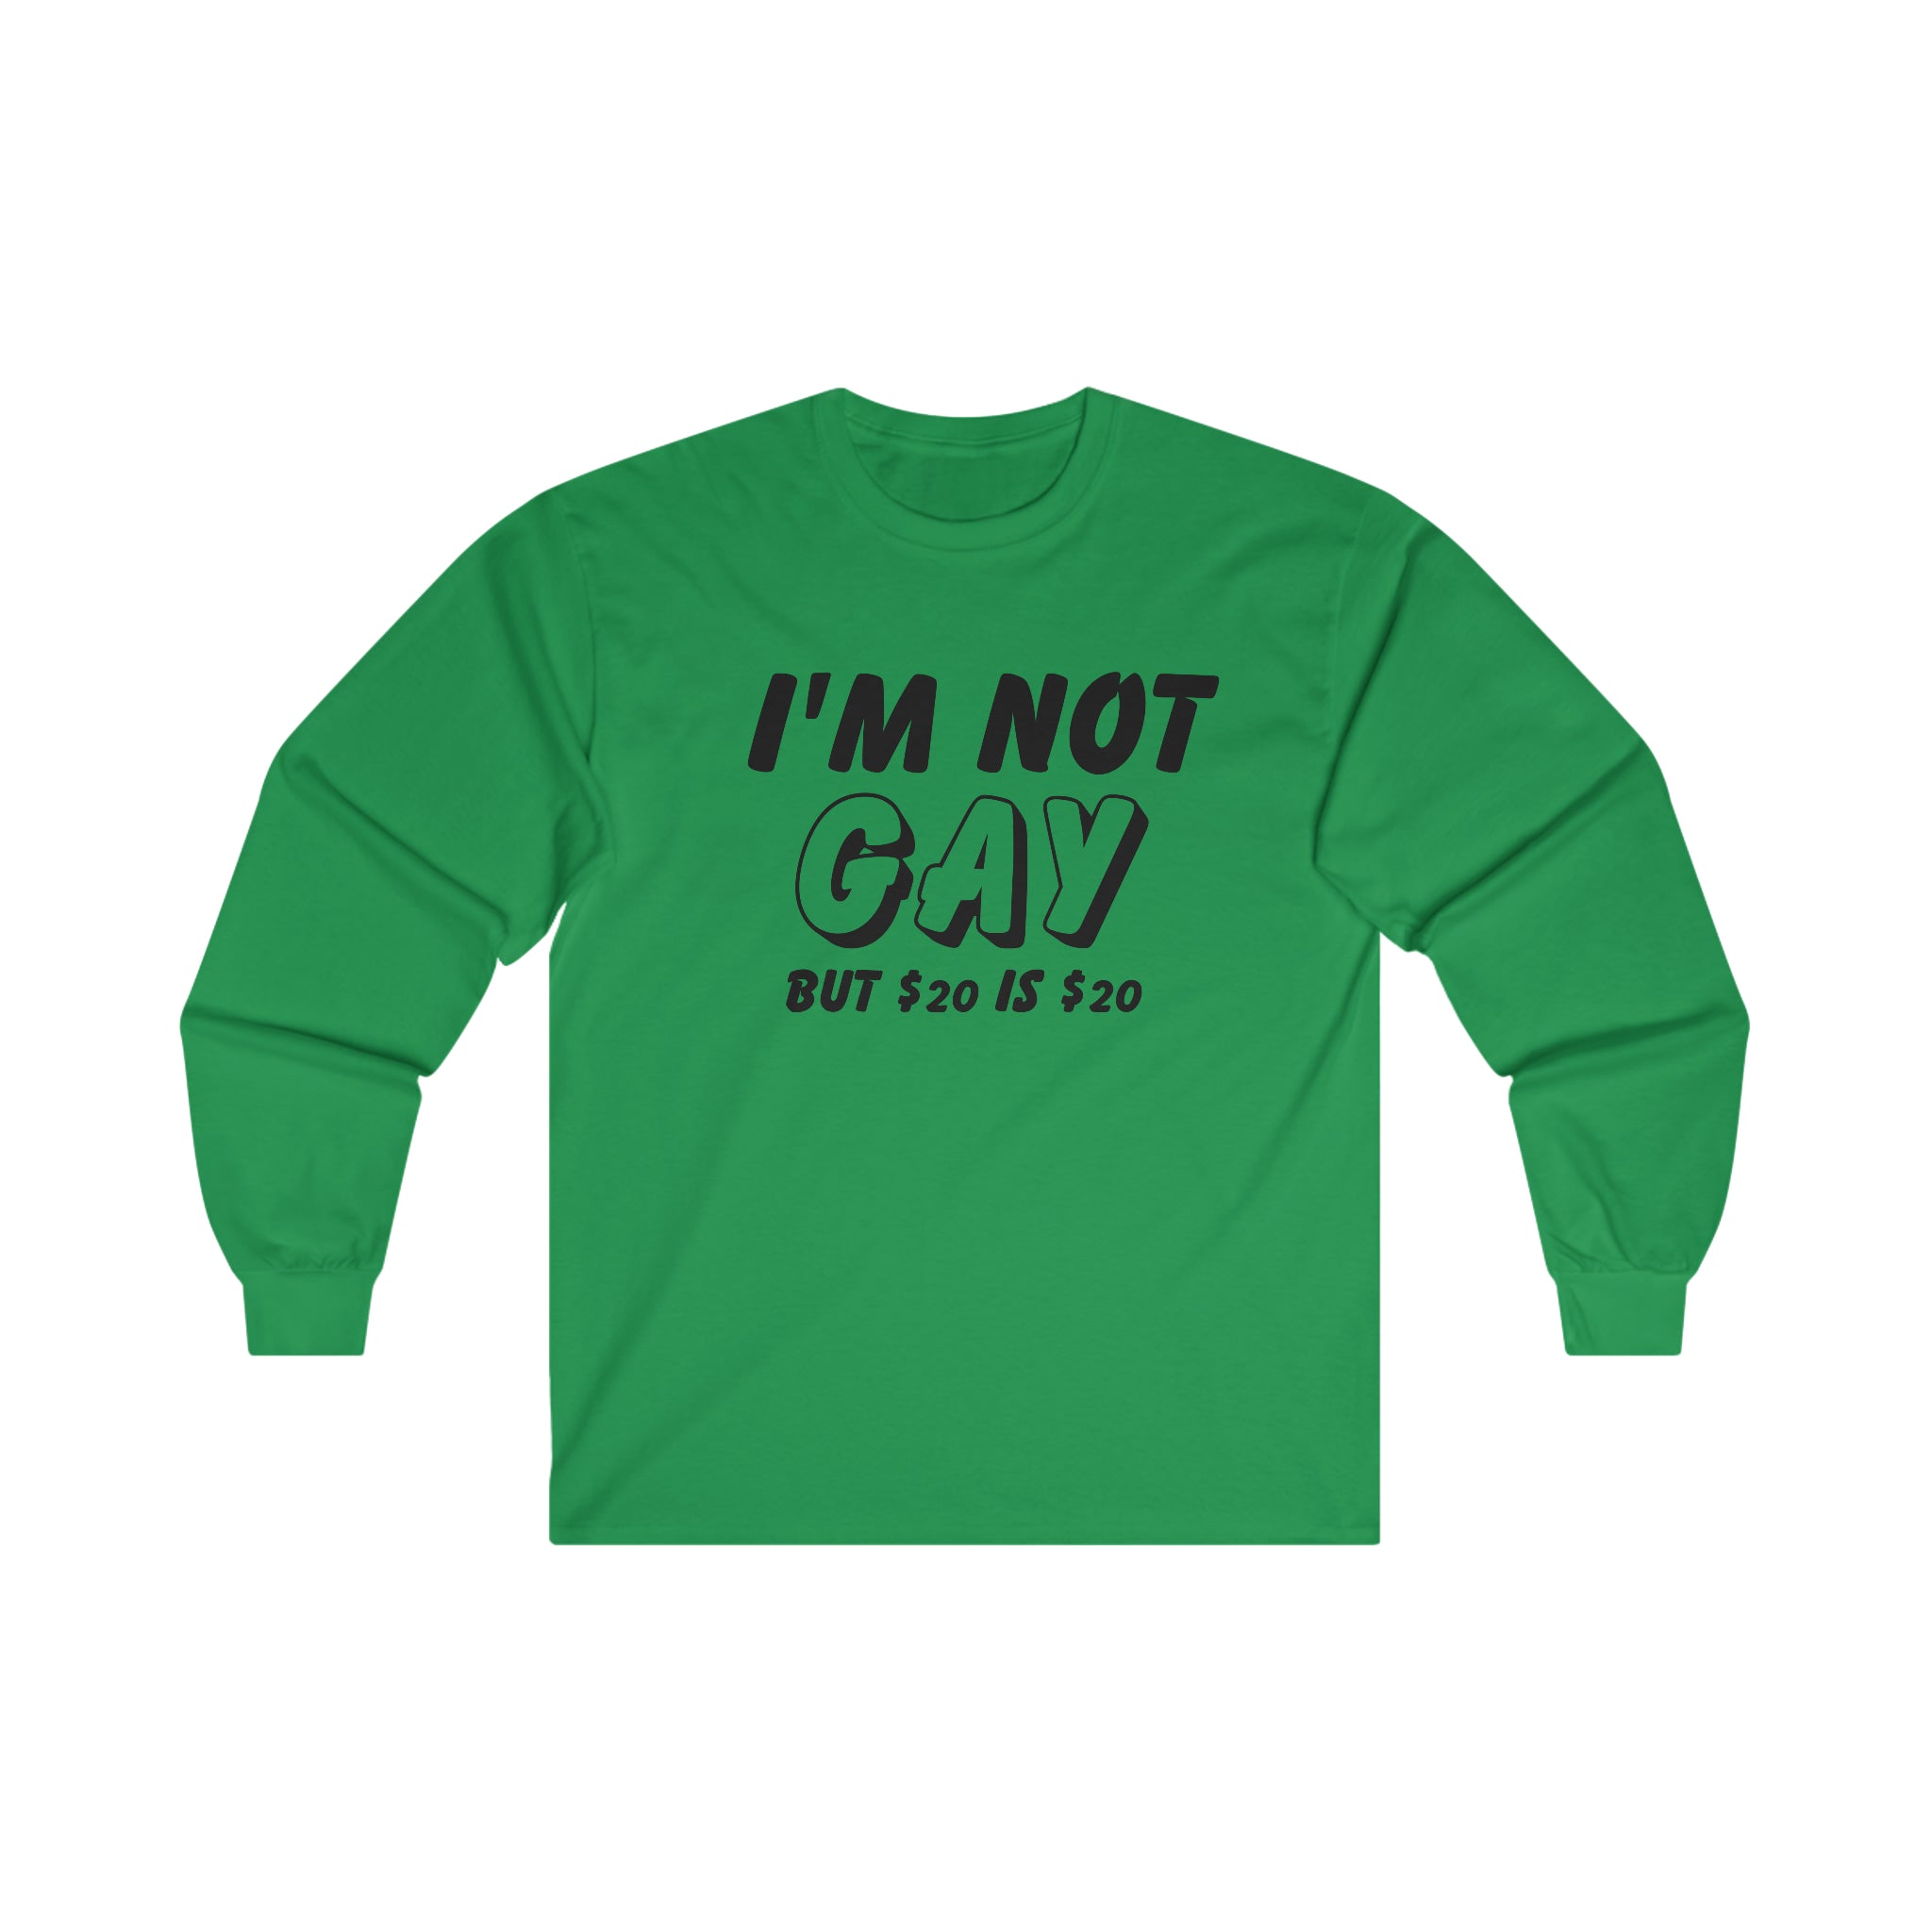 I'm Not Gay (But 20$ Is 20$)